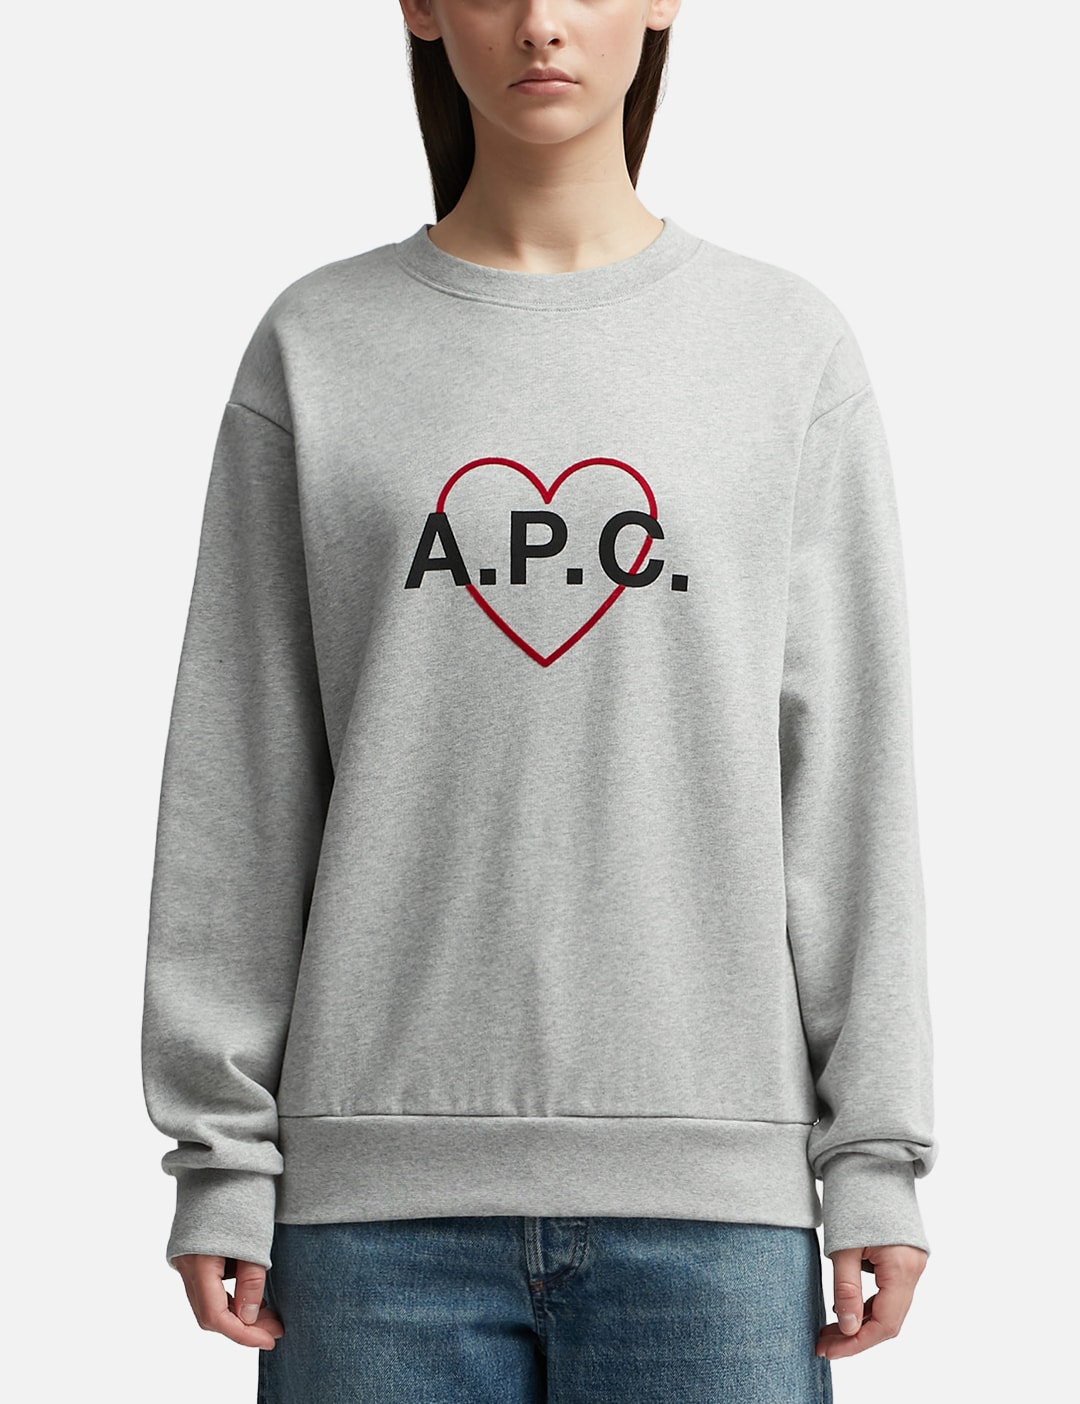 Virus udledning Præfiks A.P.C. - Leon Sweater | HBX - Globally Curated Fashion and Lifestyle by  Hypebeast